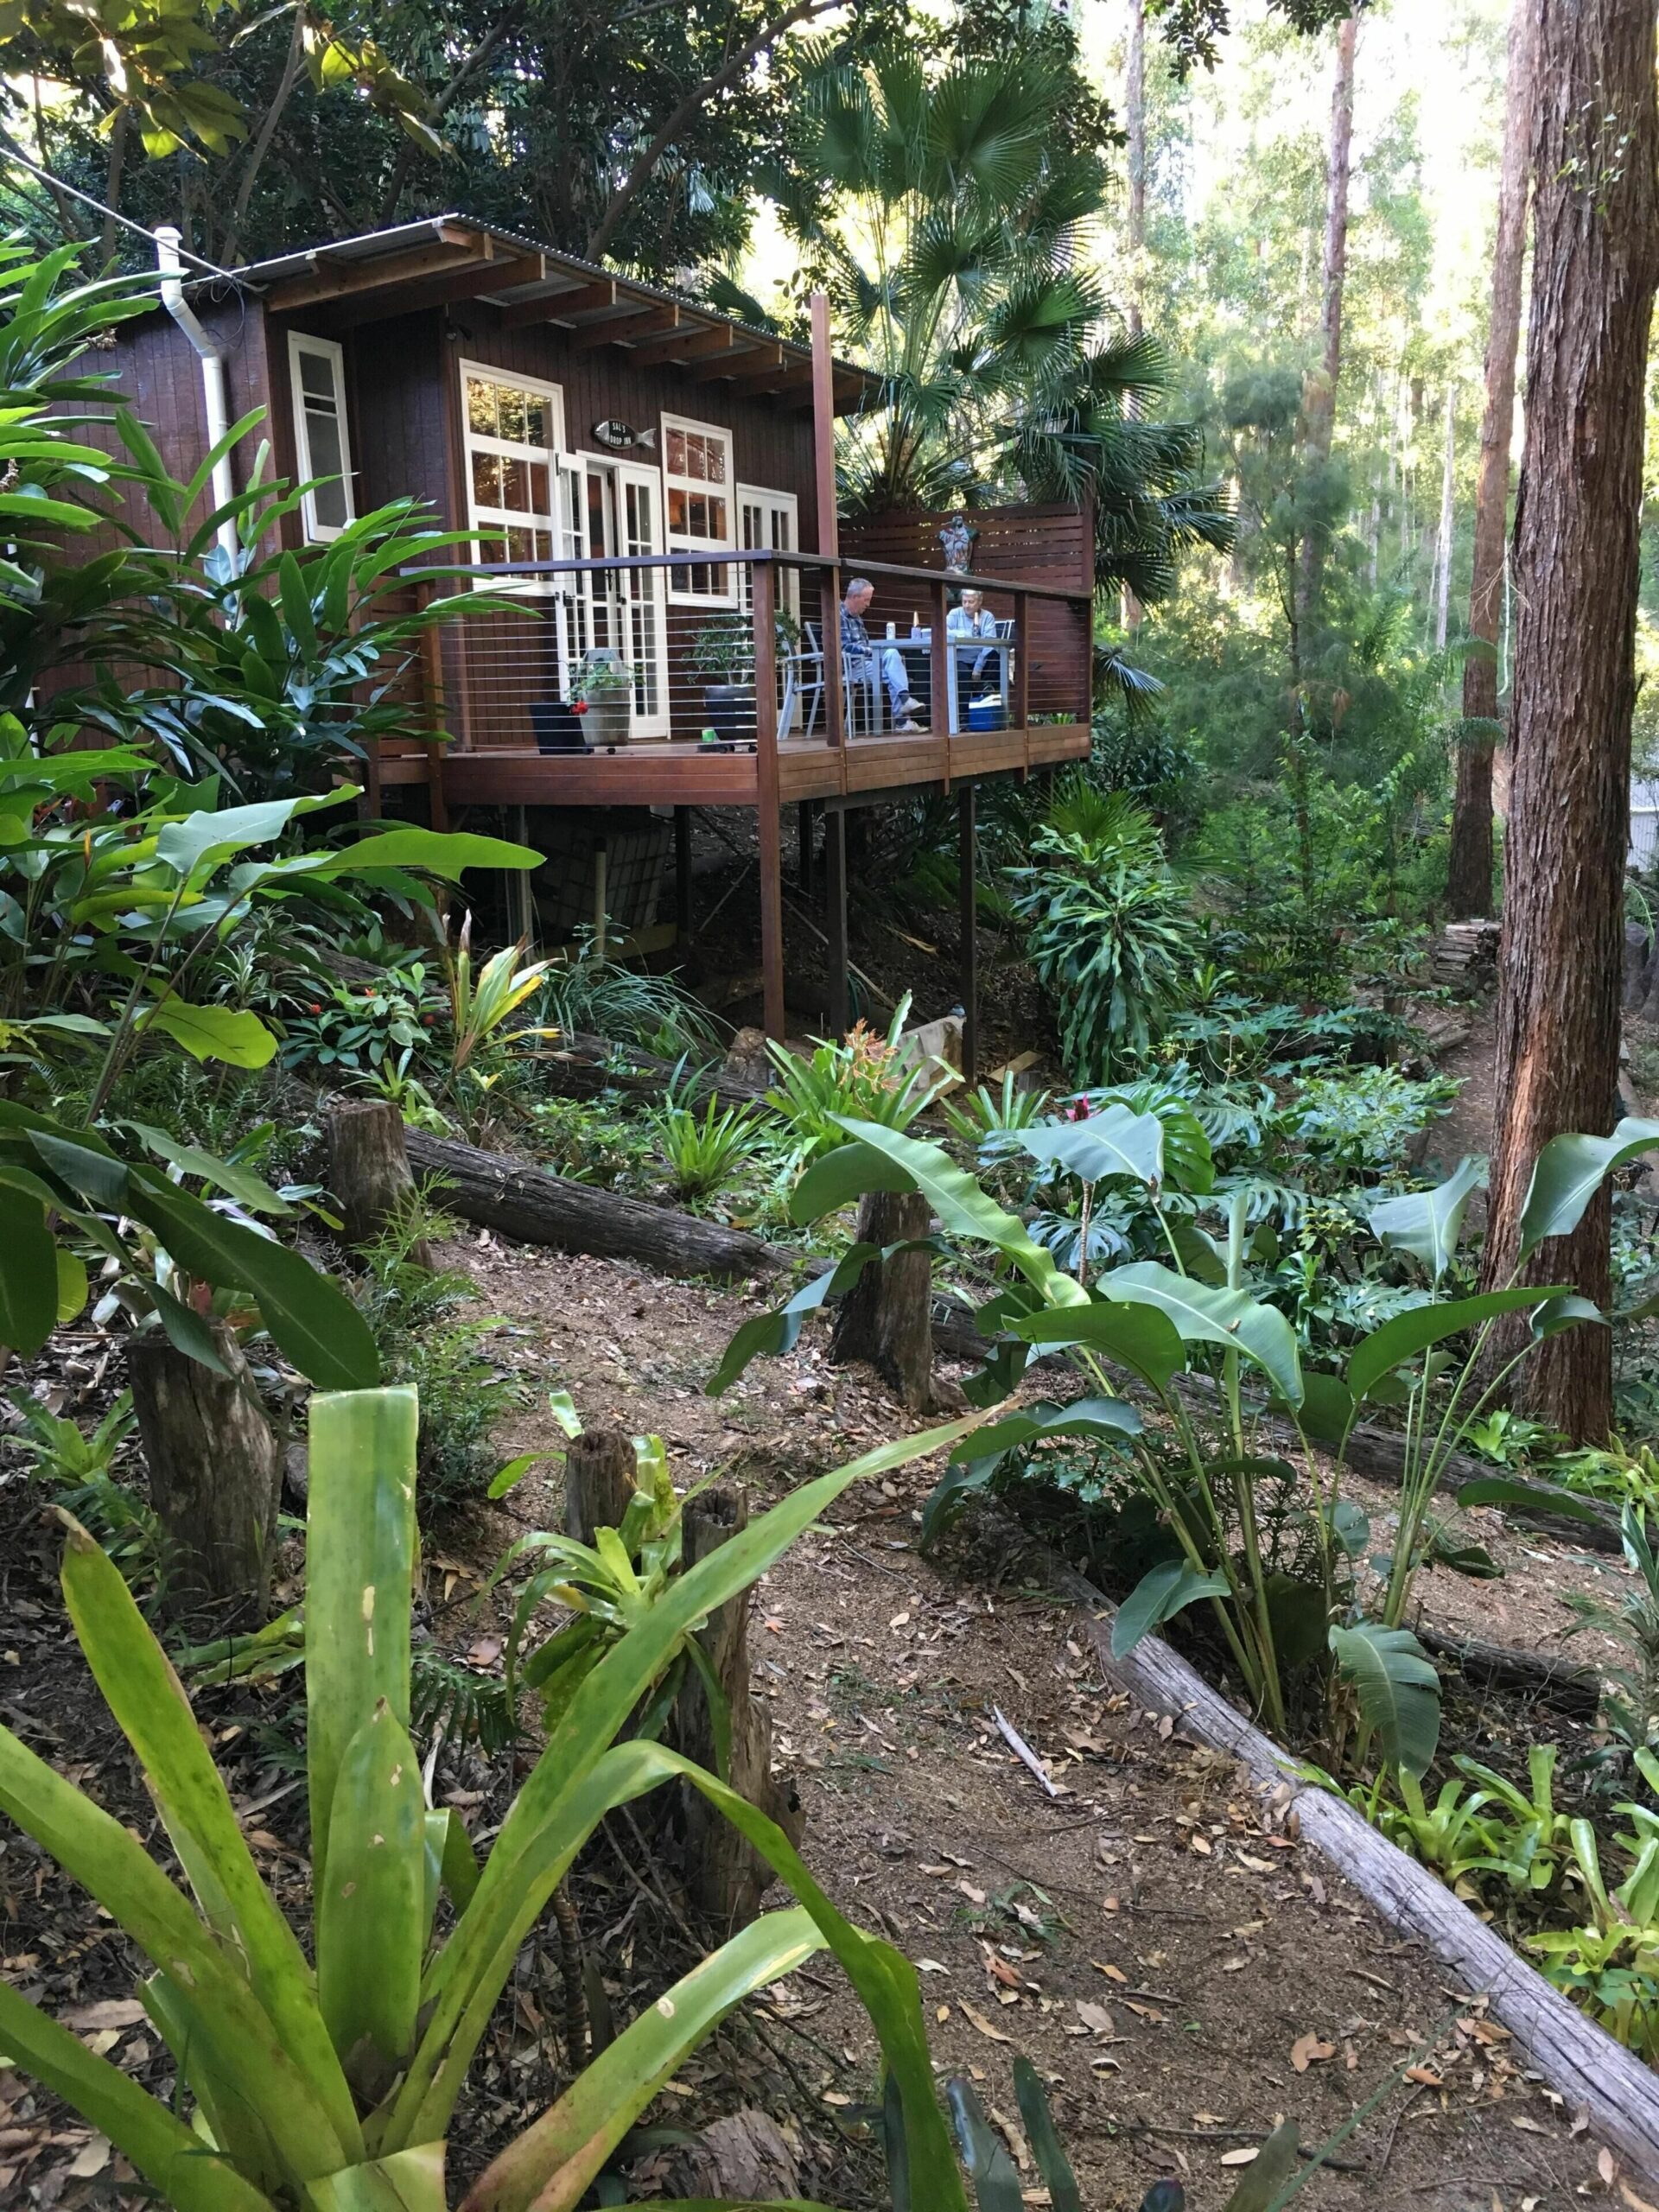 BRAND NEW Private retreat/cabin nestled in the forest and fully self contained